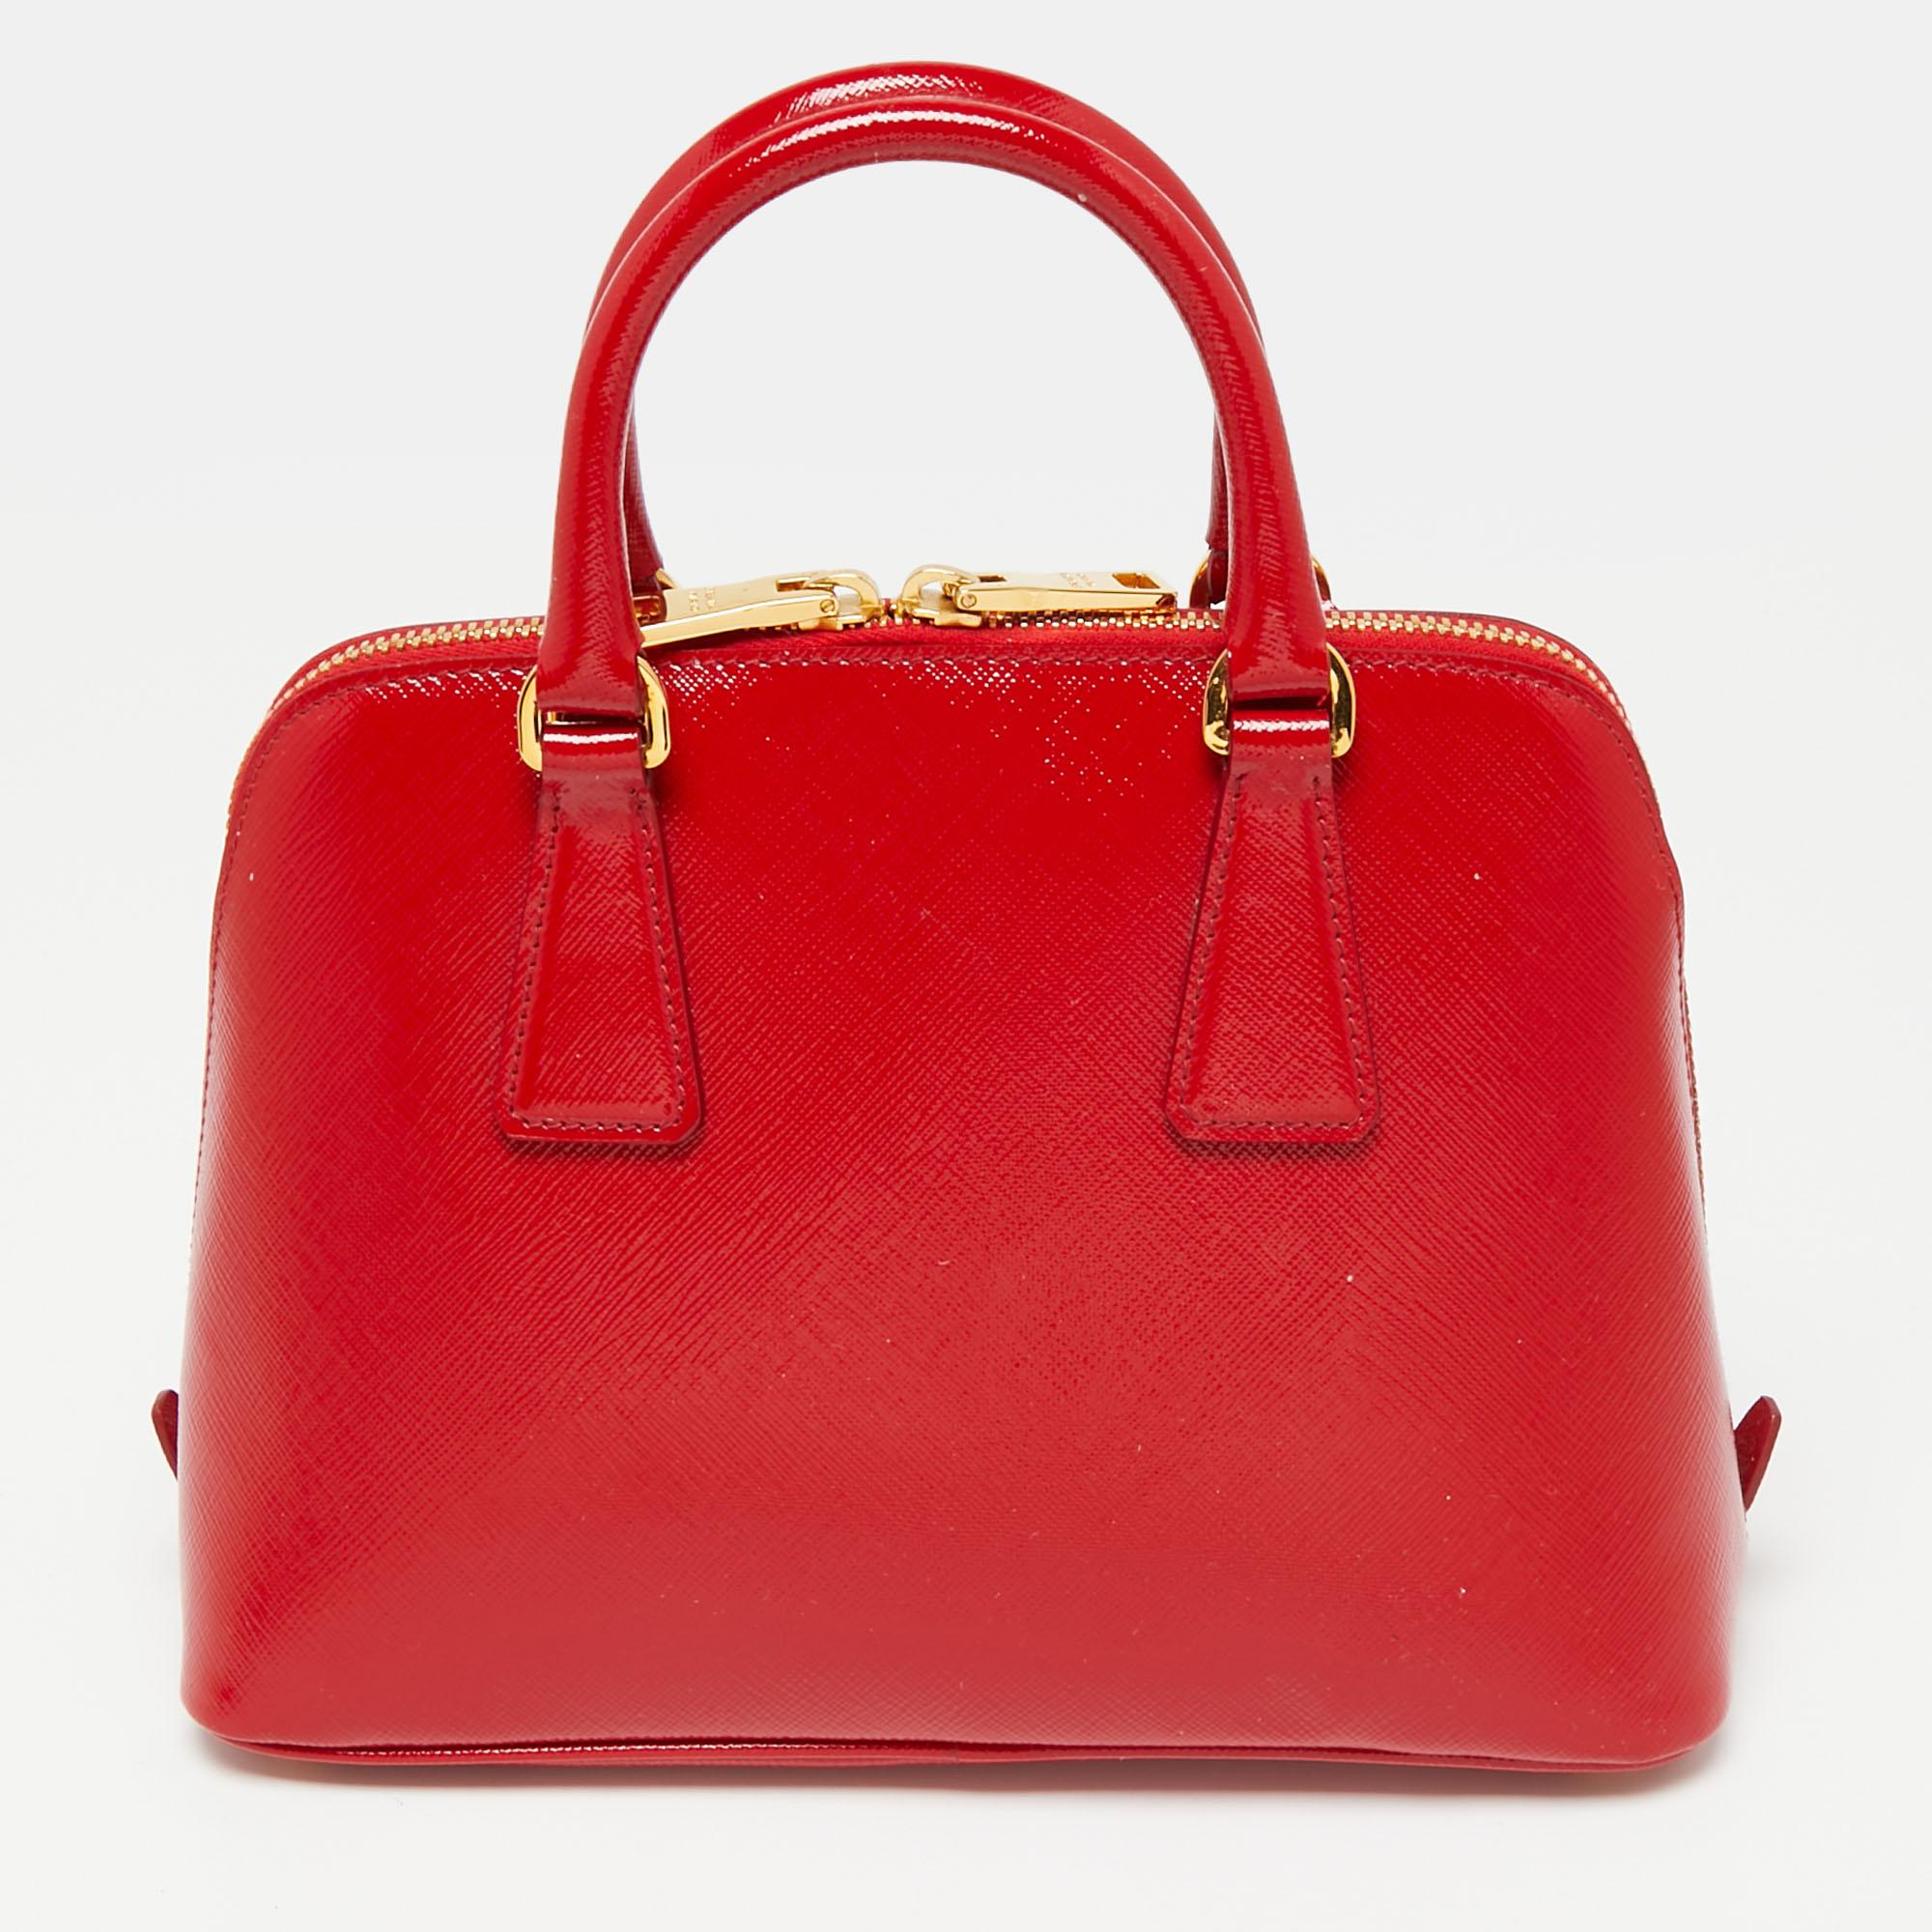 Enriched with striking elements, the appeal of this Prada Promenade bag is truly ever-lasting. The nylon-lined interior of this red creation has ideal space to accommodate your valuables and the zipper closure at the top is equipped with dual